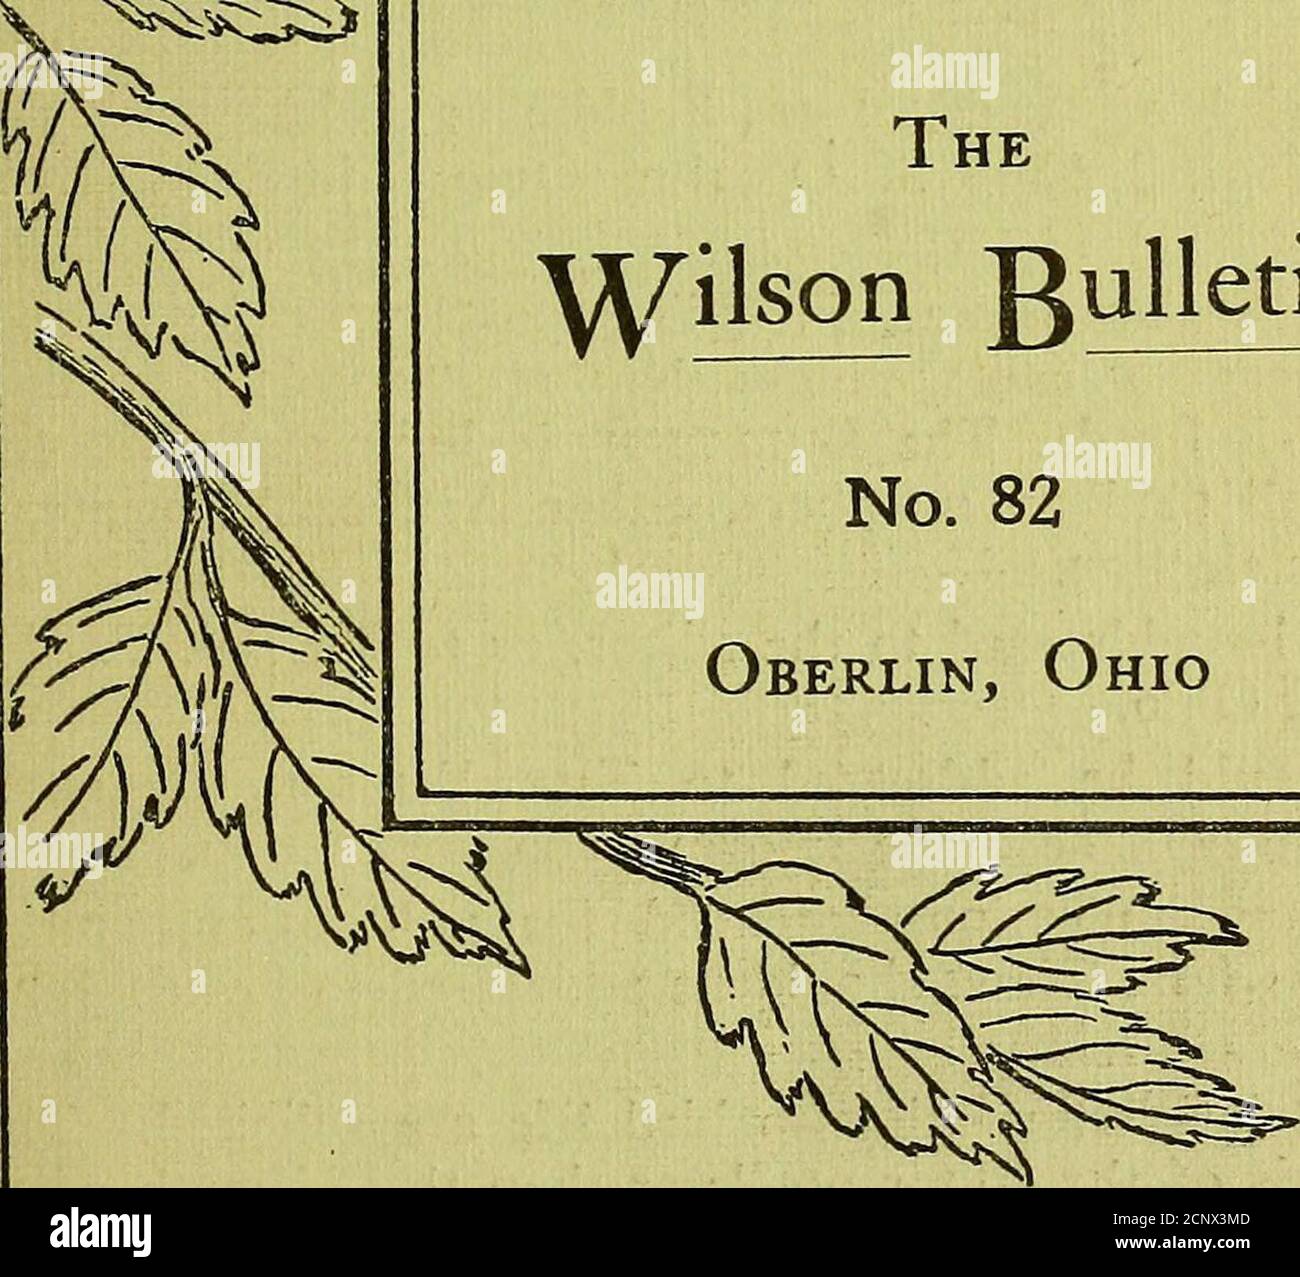 . The Wilson bulletin . Vol. XXV MARCH, 1913 No. 1 The W^ilson Bulletin No. 82Oberlin, Ohio. WILSON ORNITHOLOGICAL CLUB CONTENTS Variations in Bird Migration from Year to Year Wells W. Cooke 1 Autumn Birds in Alcona County, Michigan . J. Claire Wood 8 The Nest of the Goldfinch (Astragalinus t. tiistis), Based on Study of Deserted Nests .... Francis M. Root 21 A Critique of Barrows Michigan Bird Life Bradshaw H. Swales 27 Notes on the Breeding Habits of Agelaius phoeniceus Noel L. Hackett 36 Corrections to a Preliminary List of the Summer Birds of Fall River County, South-western Dakota . S. S. Stock Photo